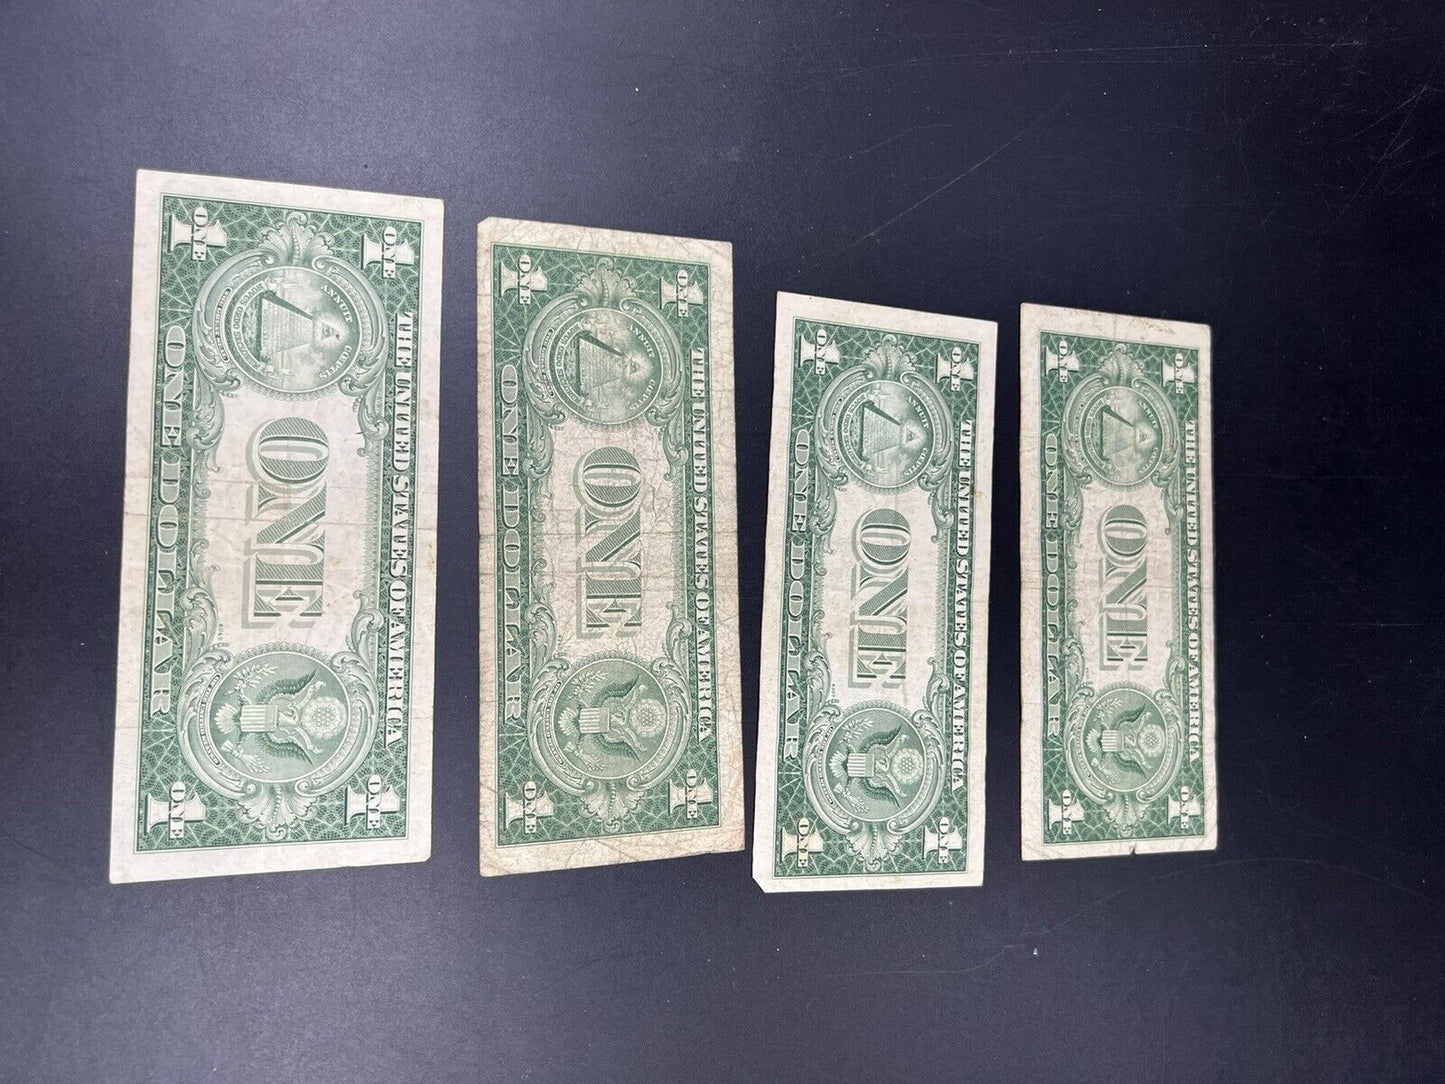 Lot of 4 1935 $1 Silver Certificate Blue Seal Circ US Currency Neat Serial #s